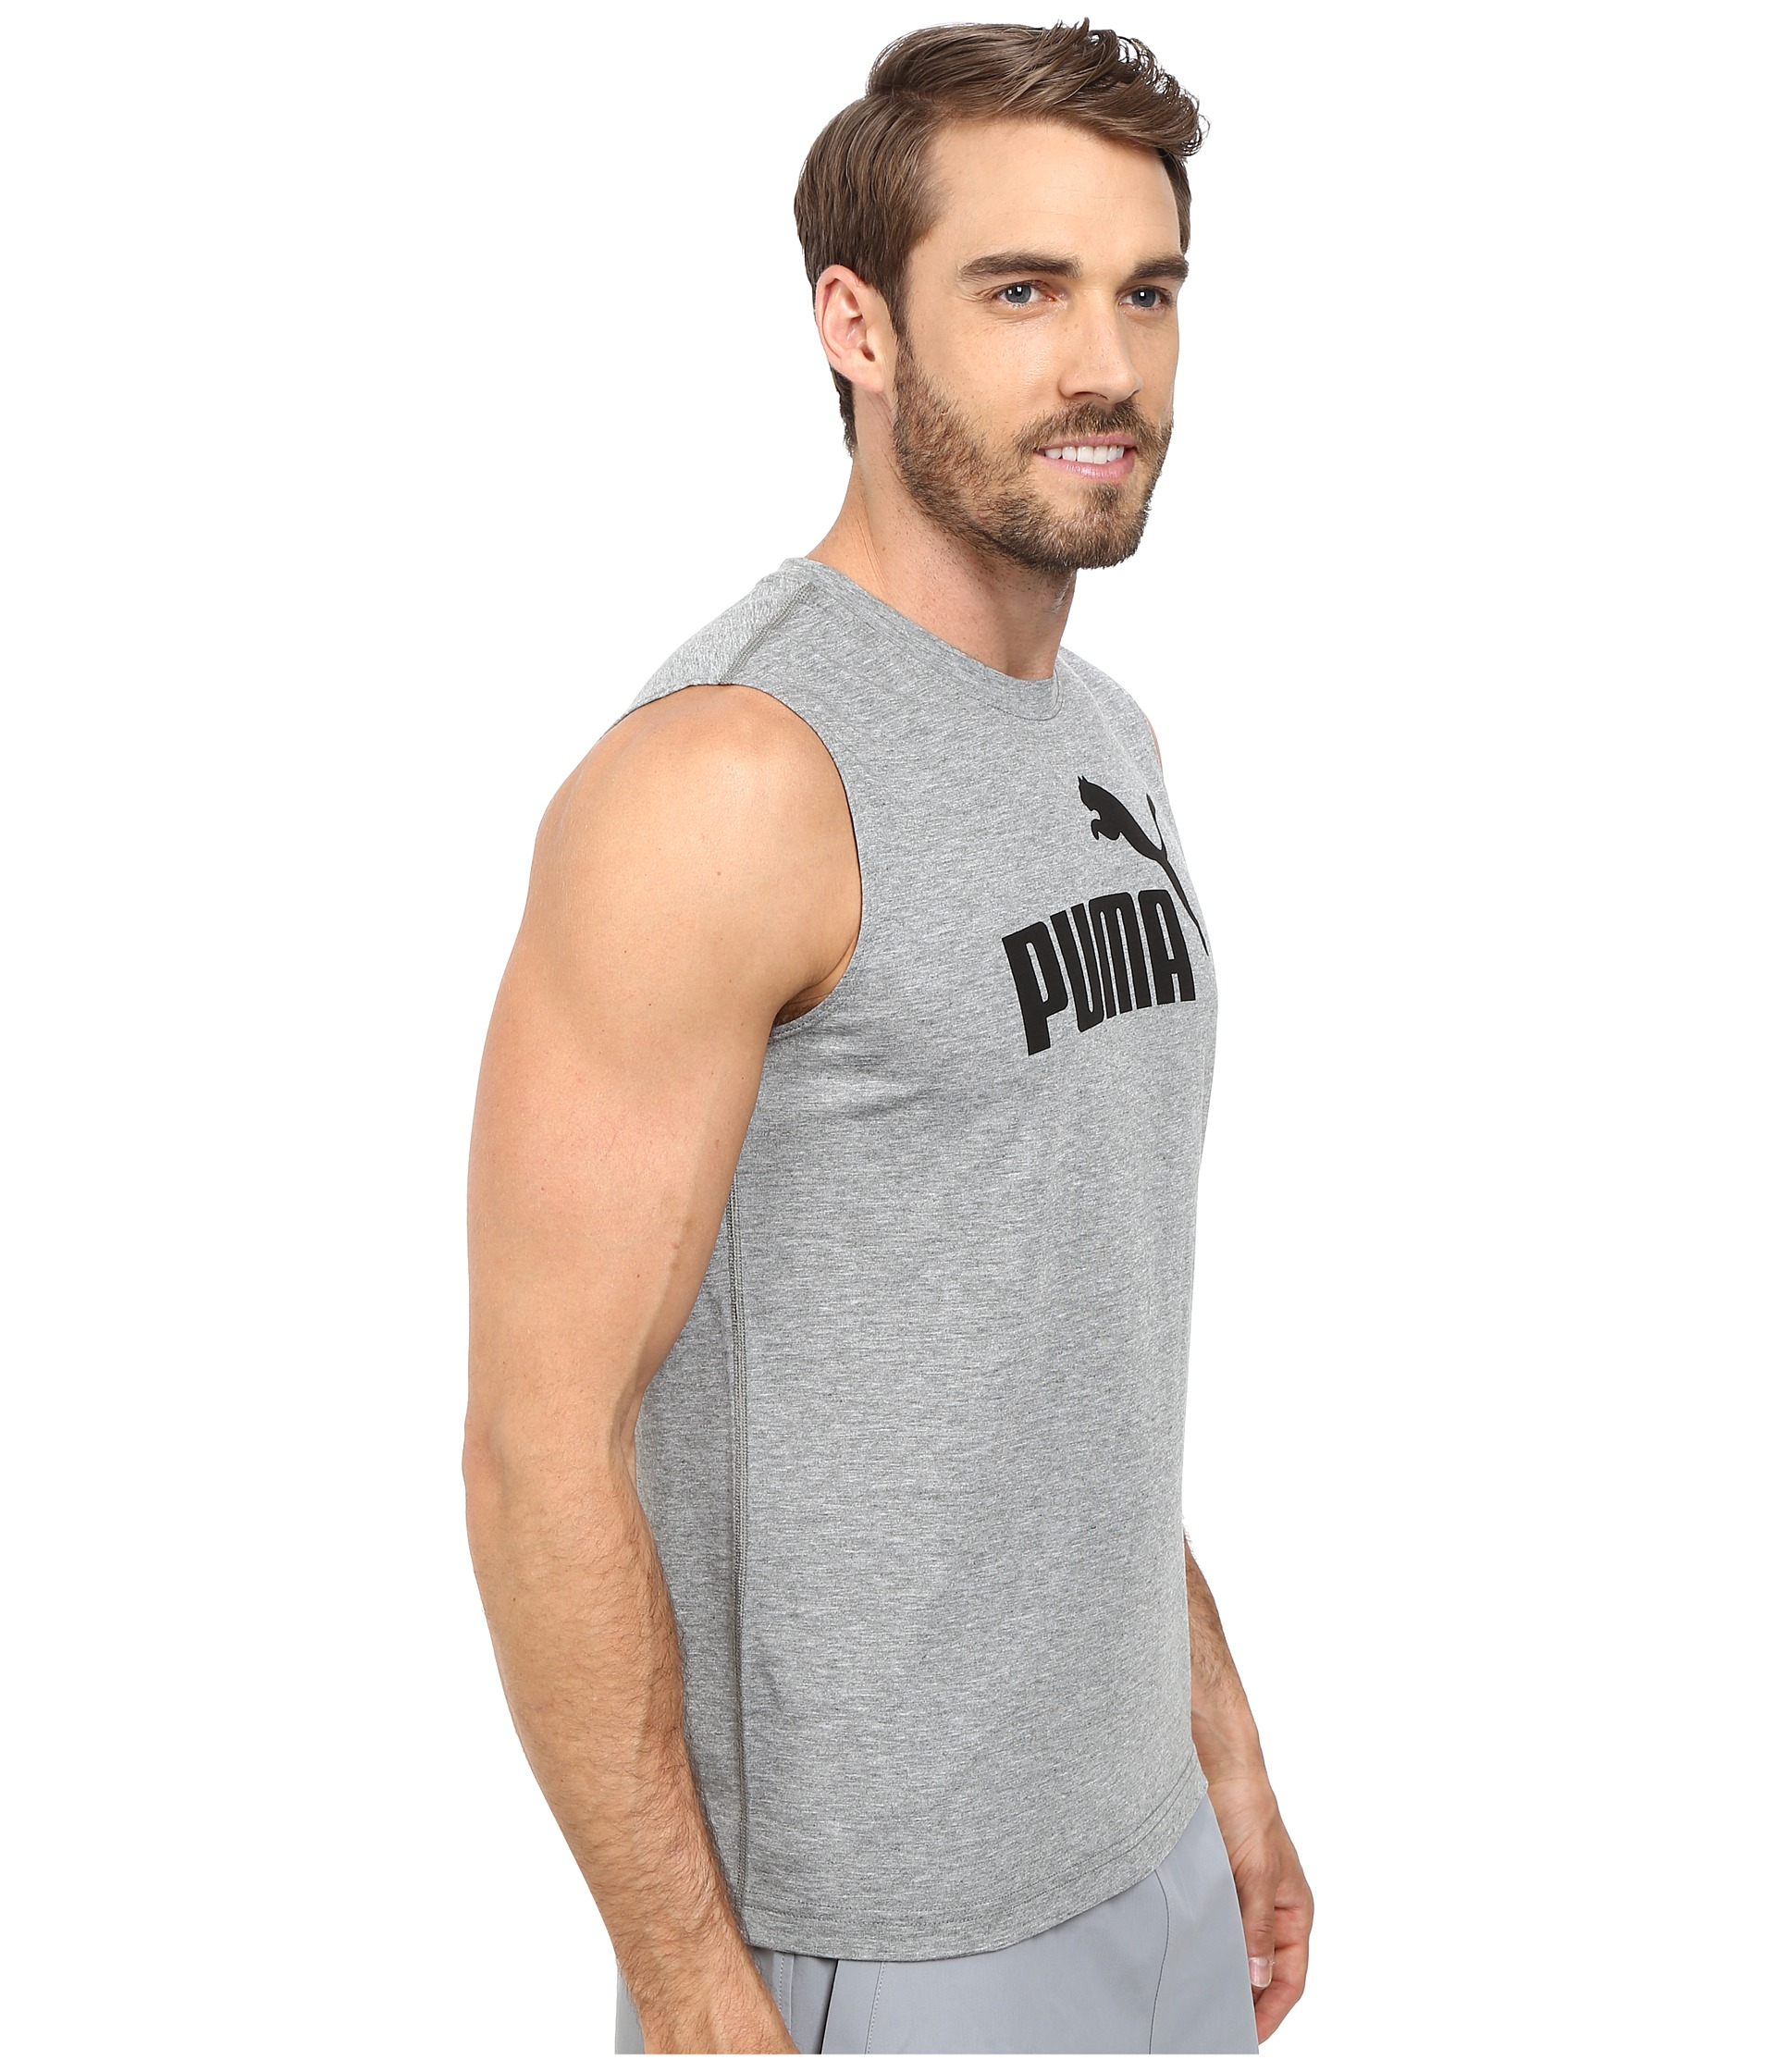 PUMA Essential No. 1 Logo Sleeveless Tee in Gray for Men - Lyst